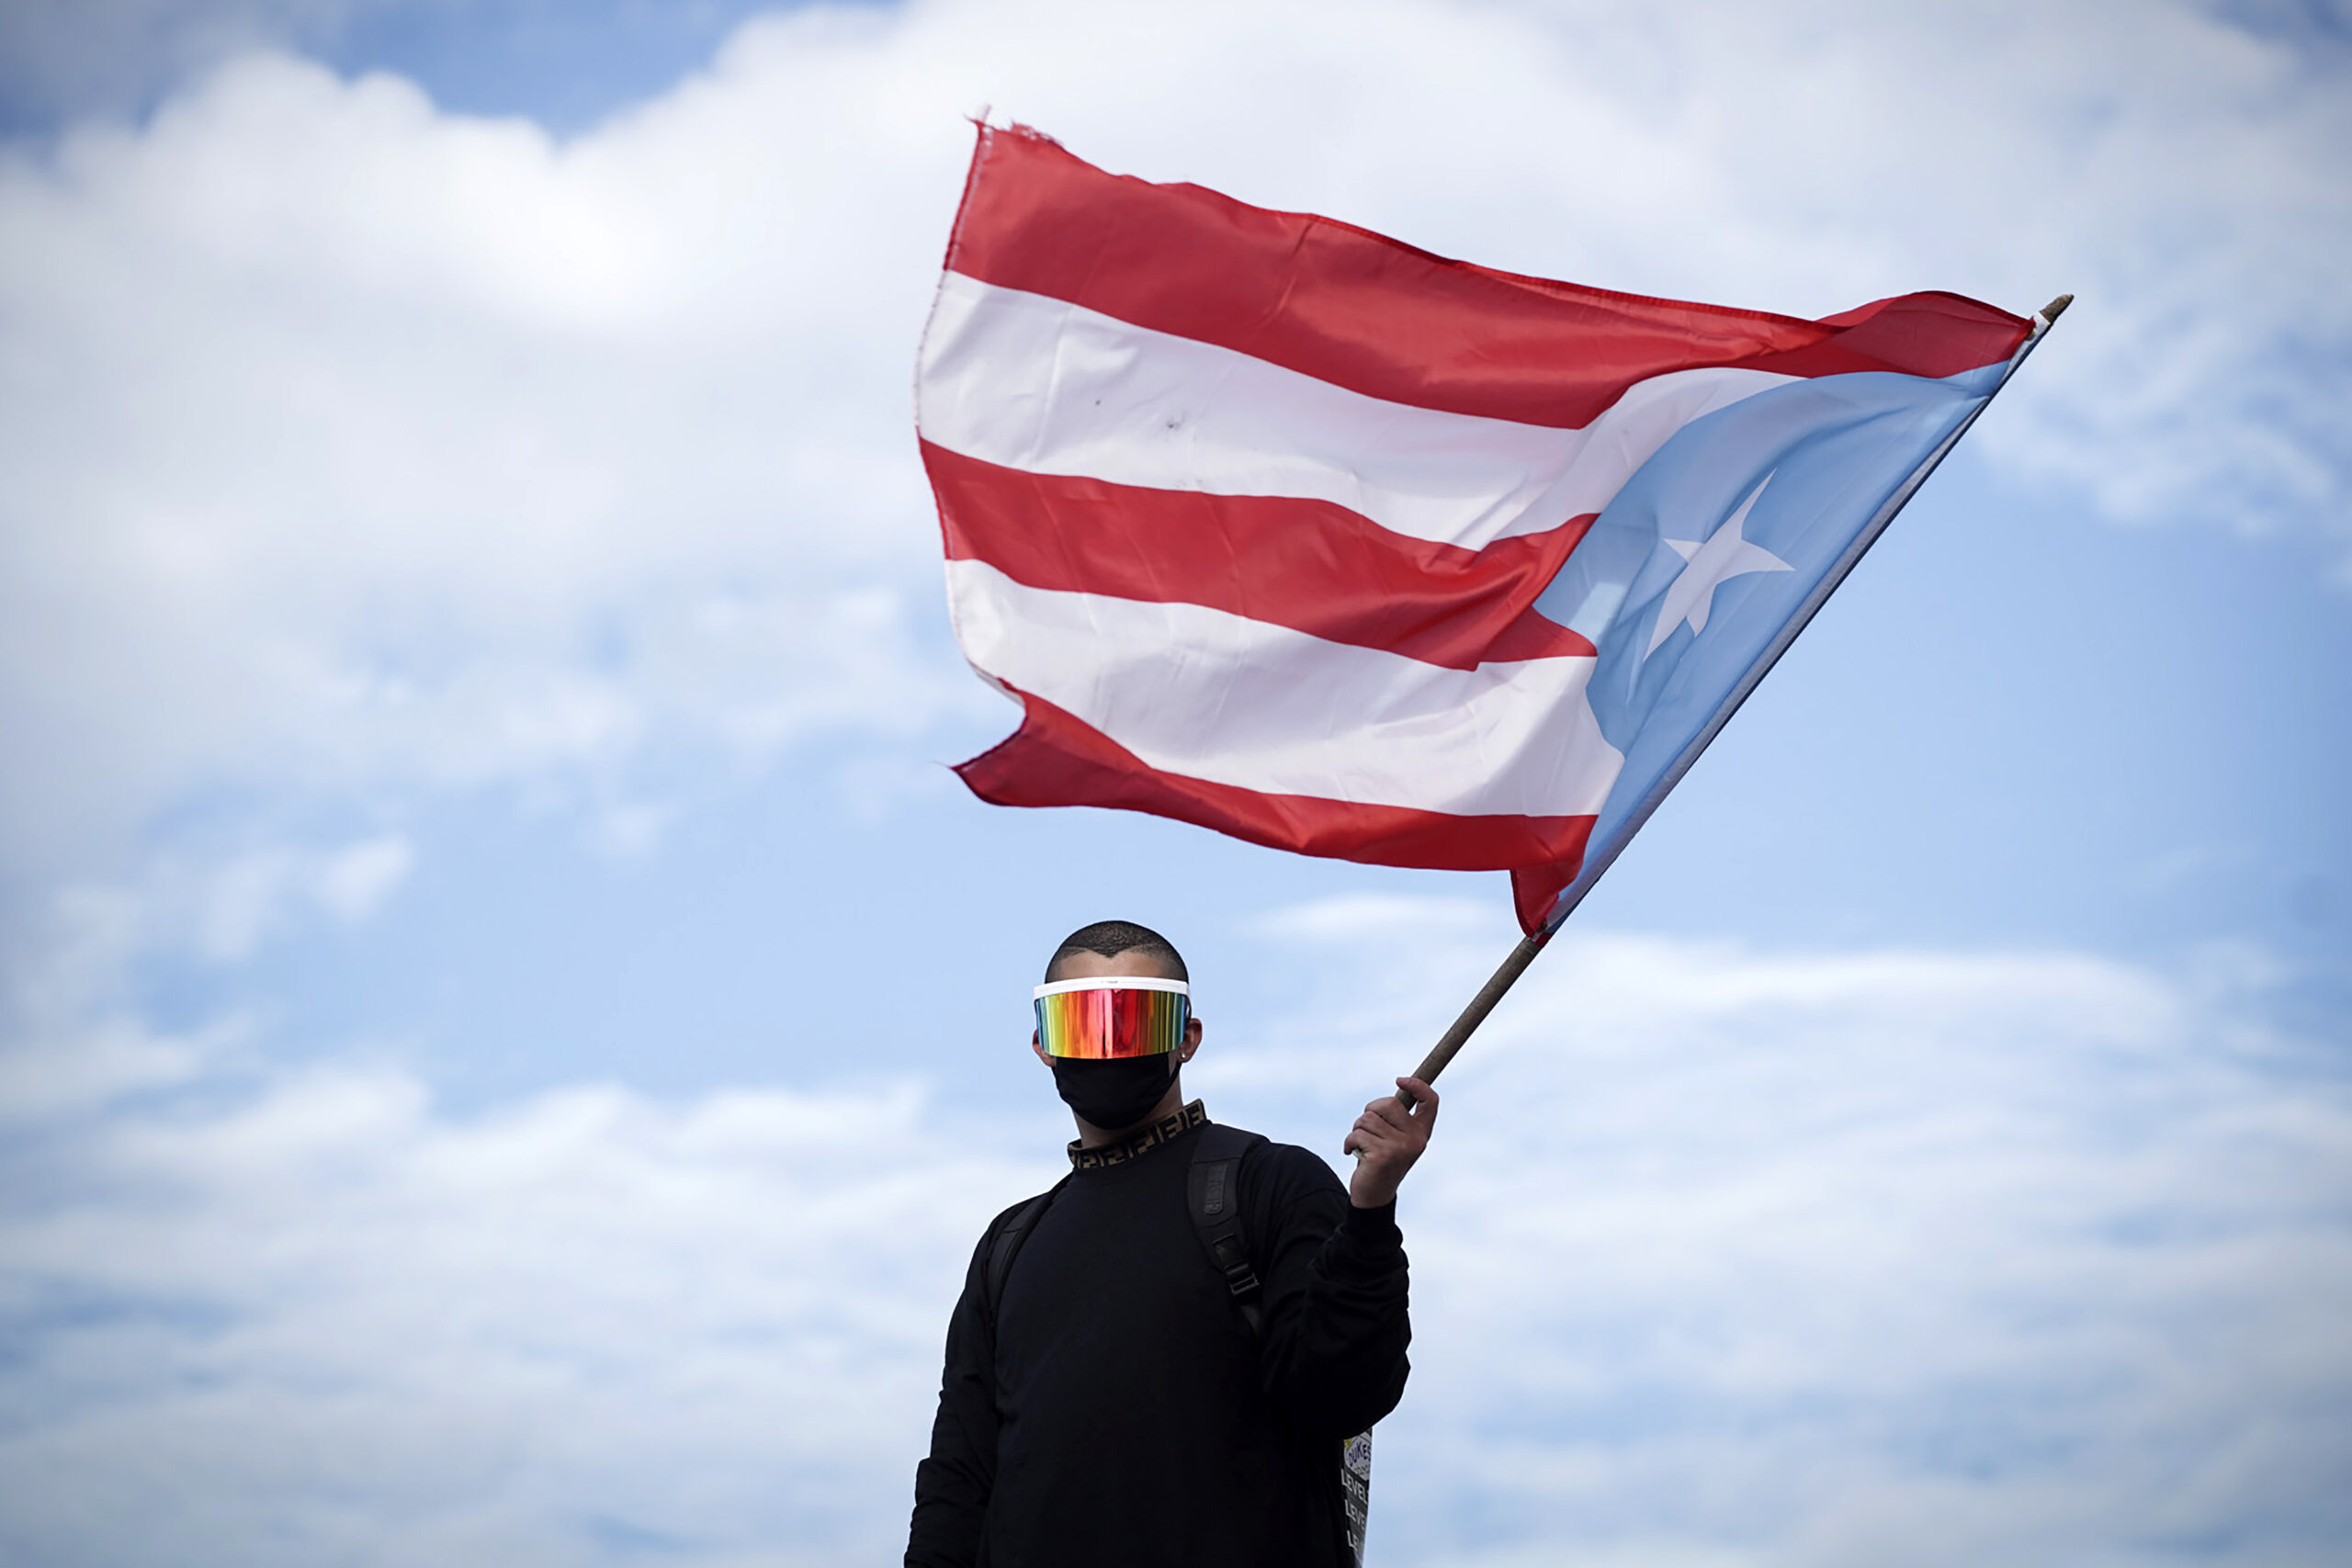 Bad Bunny wearing a black long sleeved shirt, a black cloth face mask, and giant sunglasses that shield his eyes, looking directly at the camera while waving a giant Puerto Rican flag.